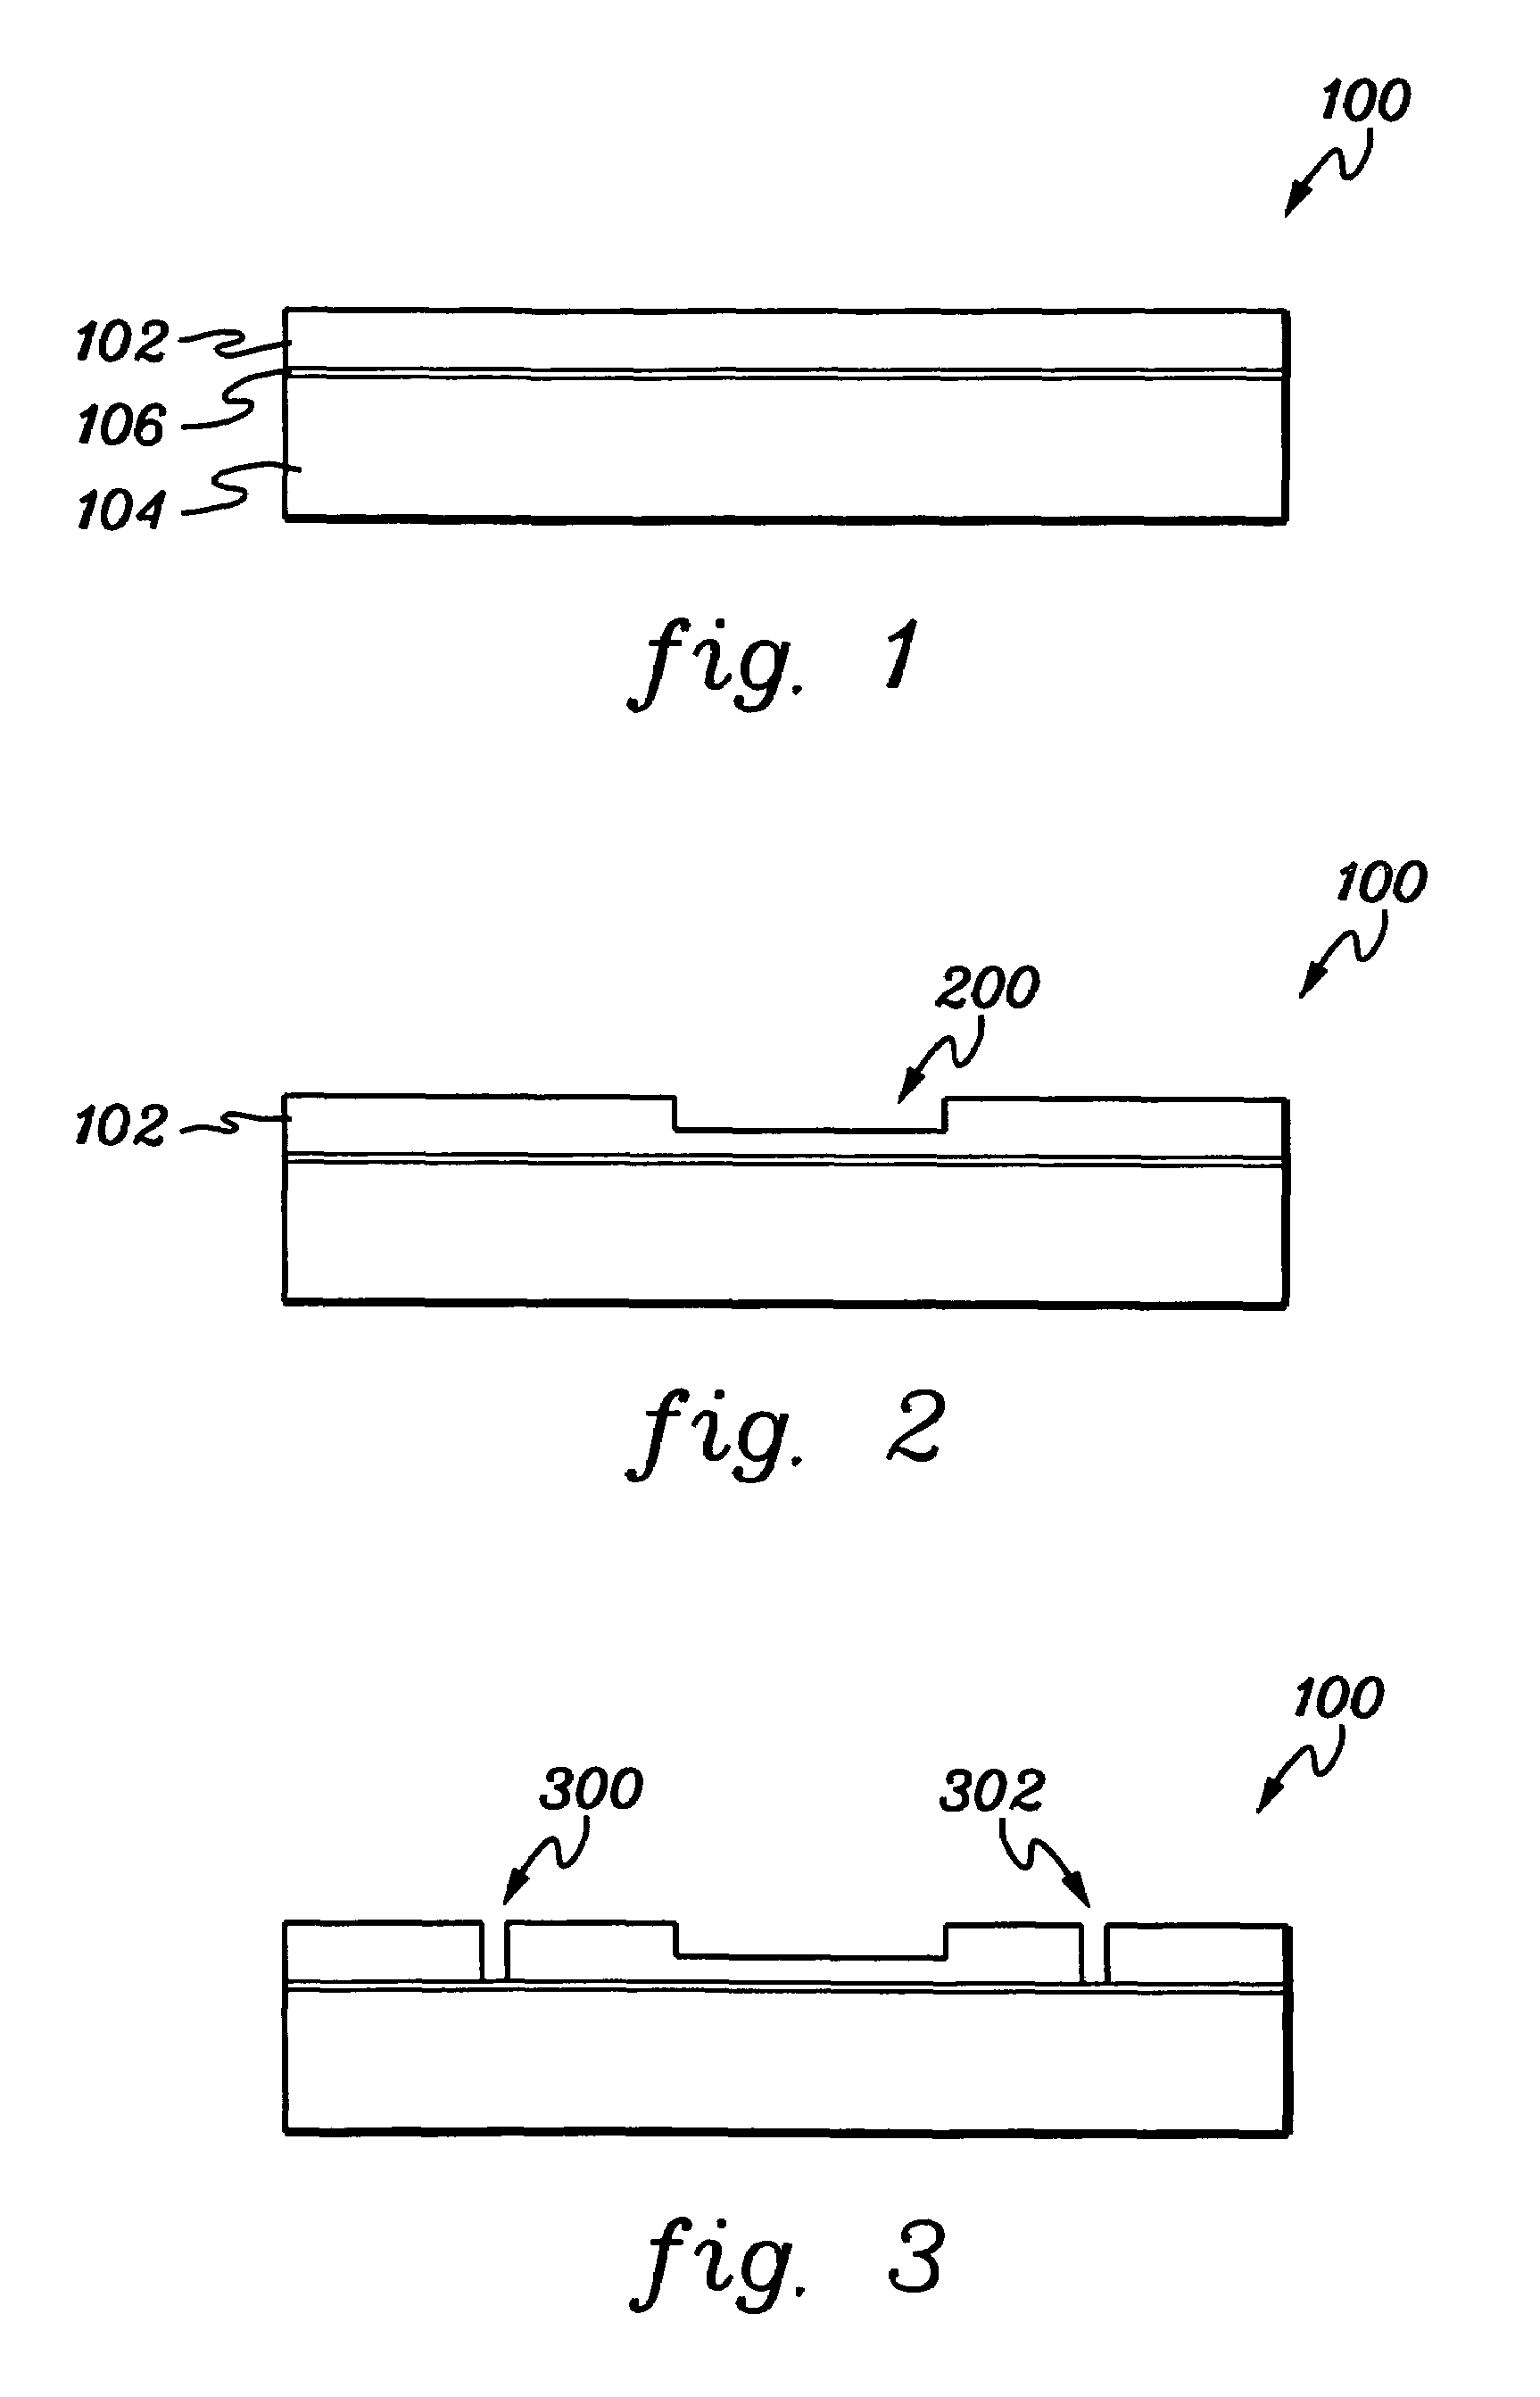 MEMS structure with anodically bonded silicon-on-insulator substrate